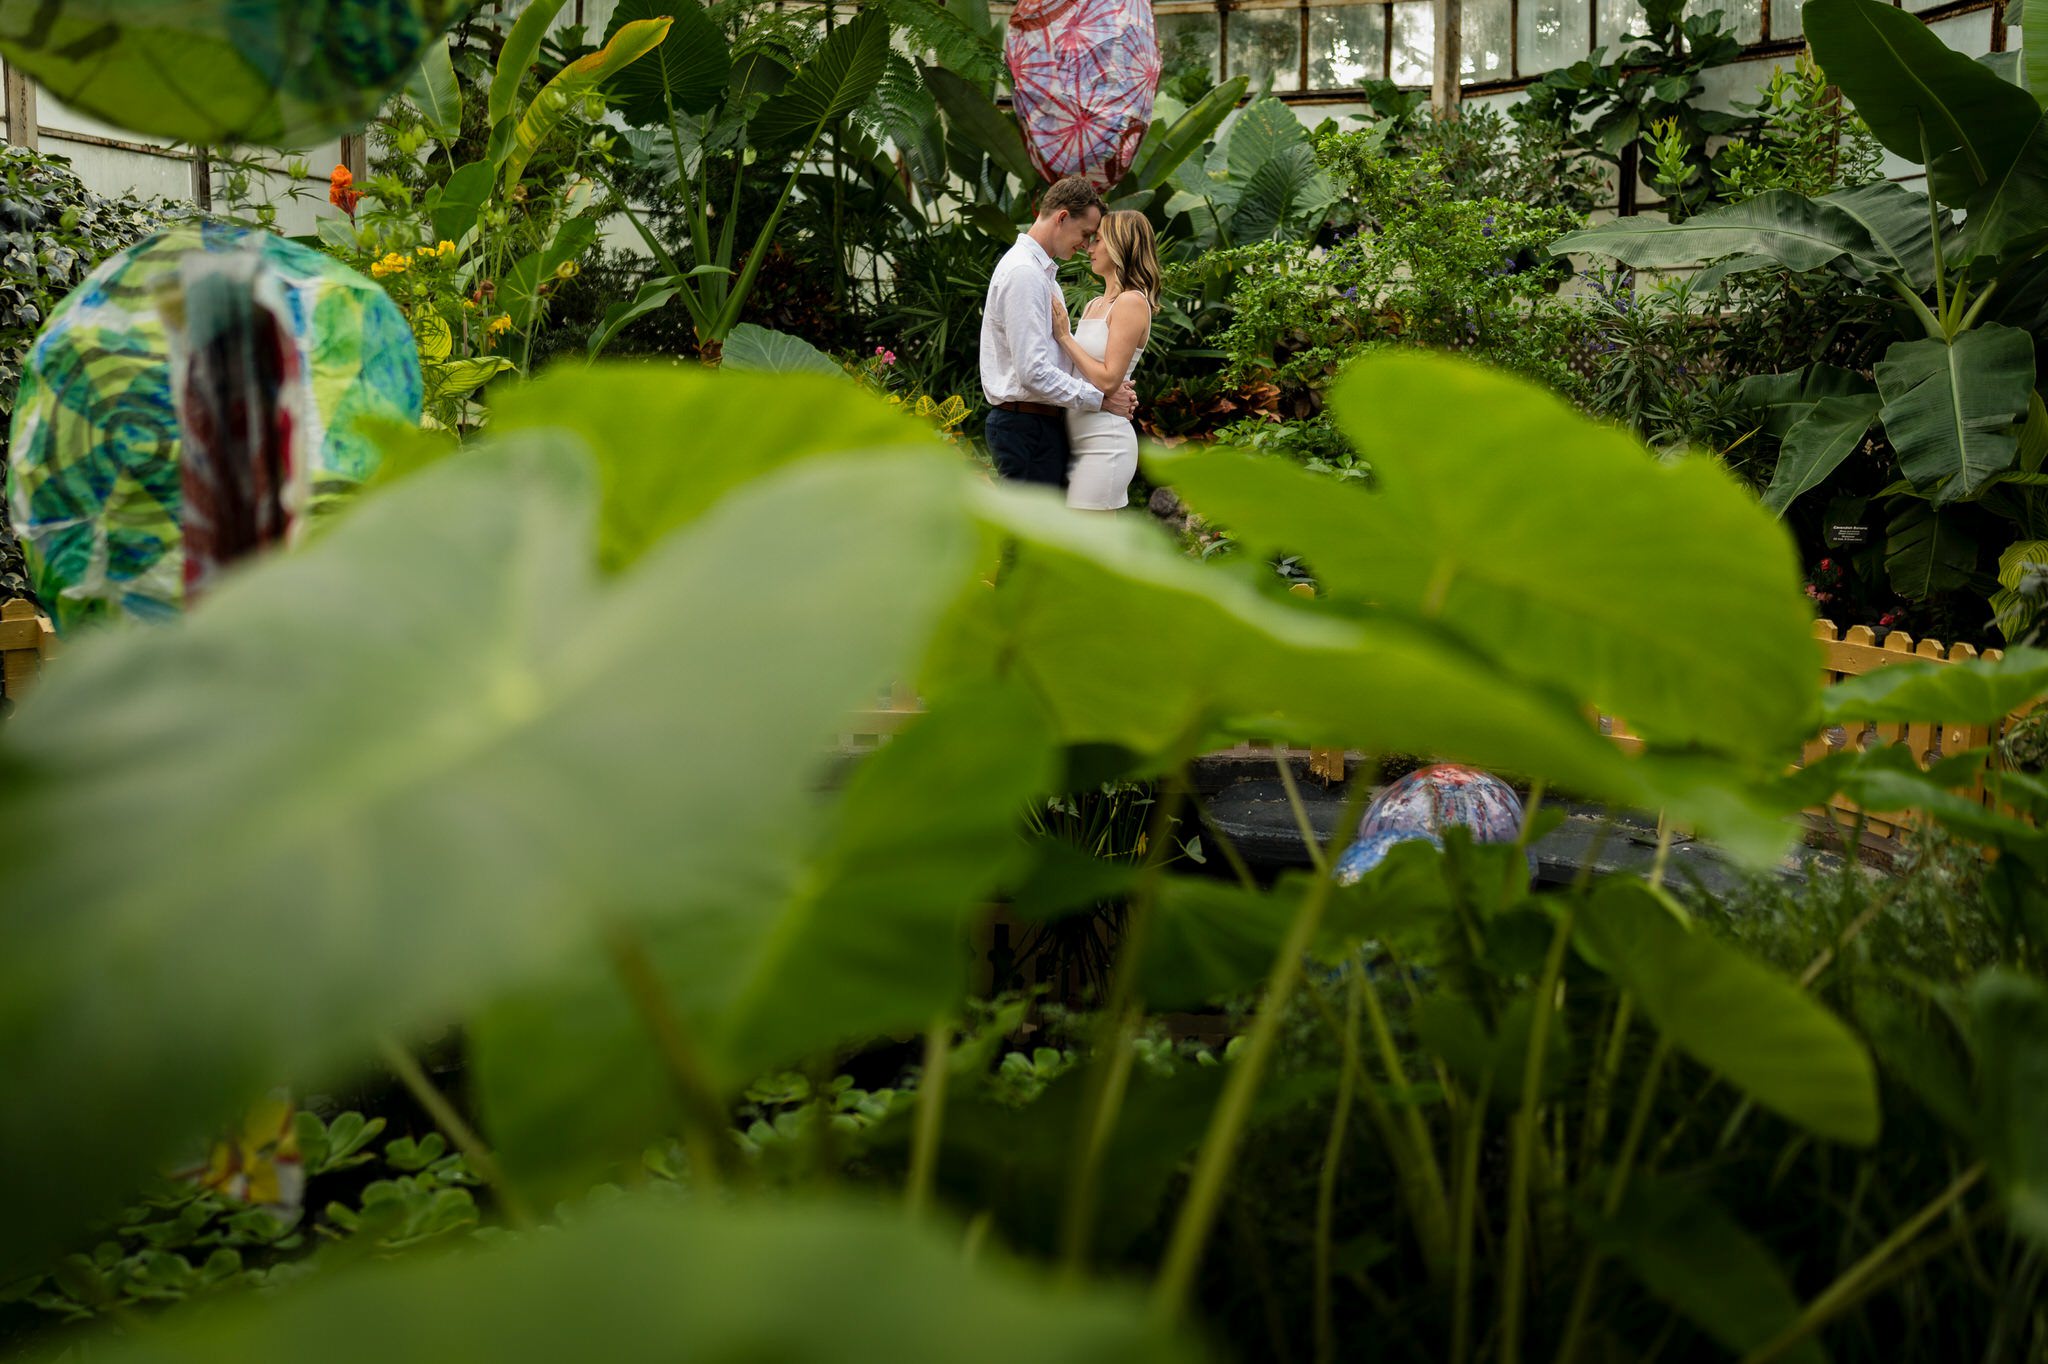 With a big leaf in the foreground, a couples poses during their engagement session at the Lincoln Park Conservatory in Chicago.  